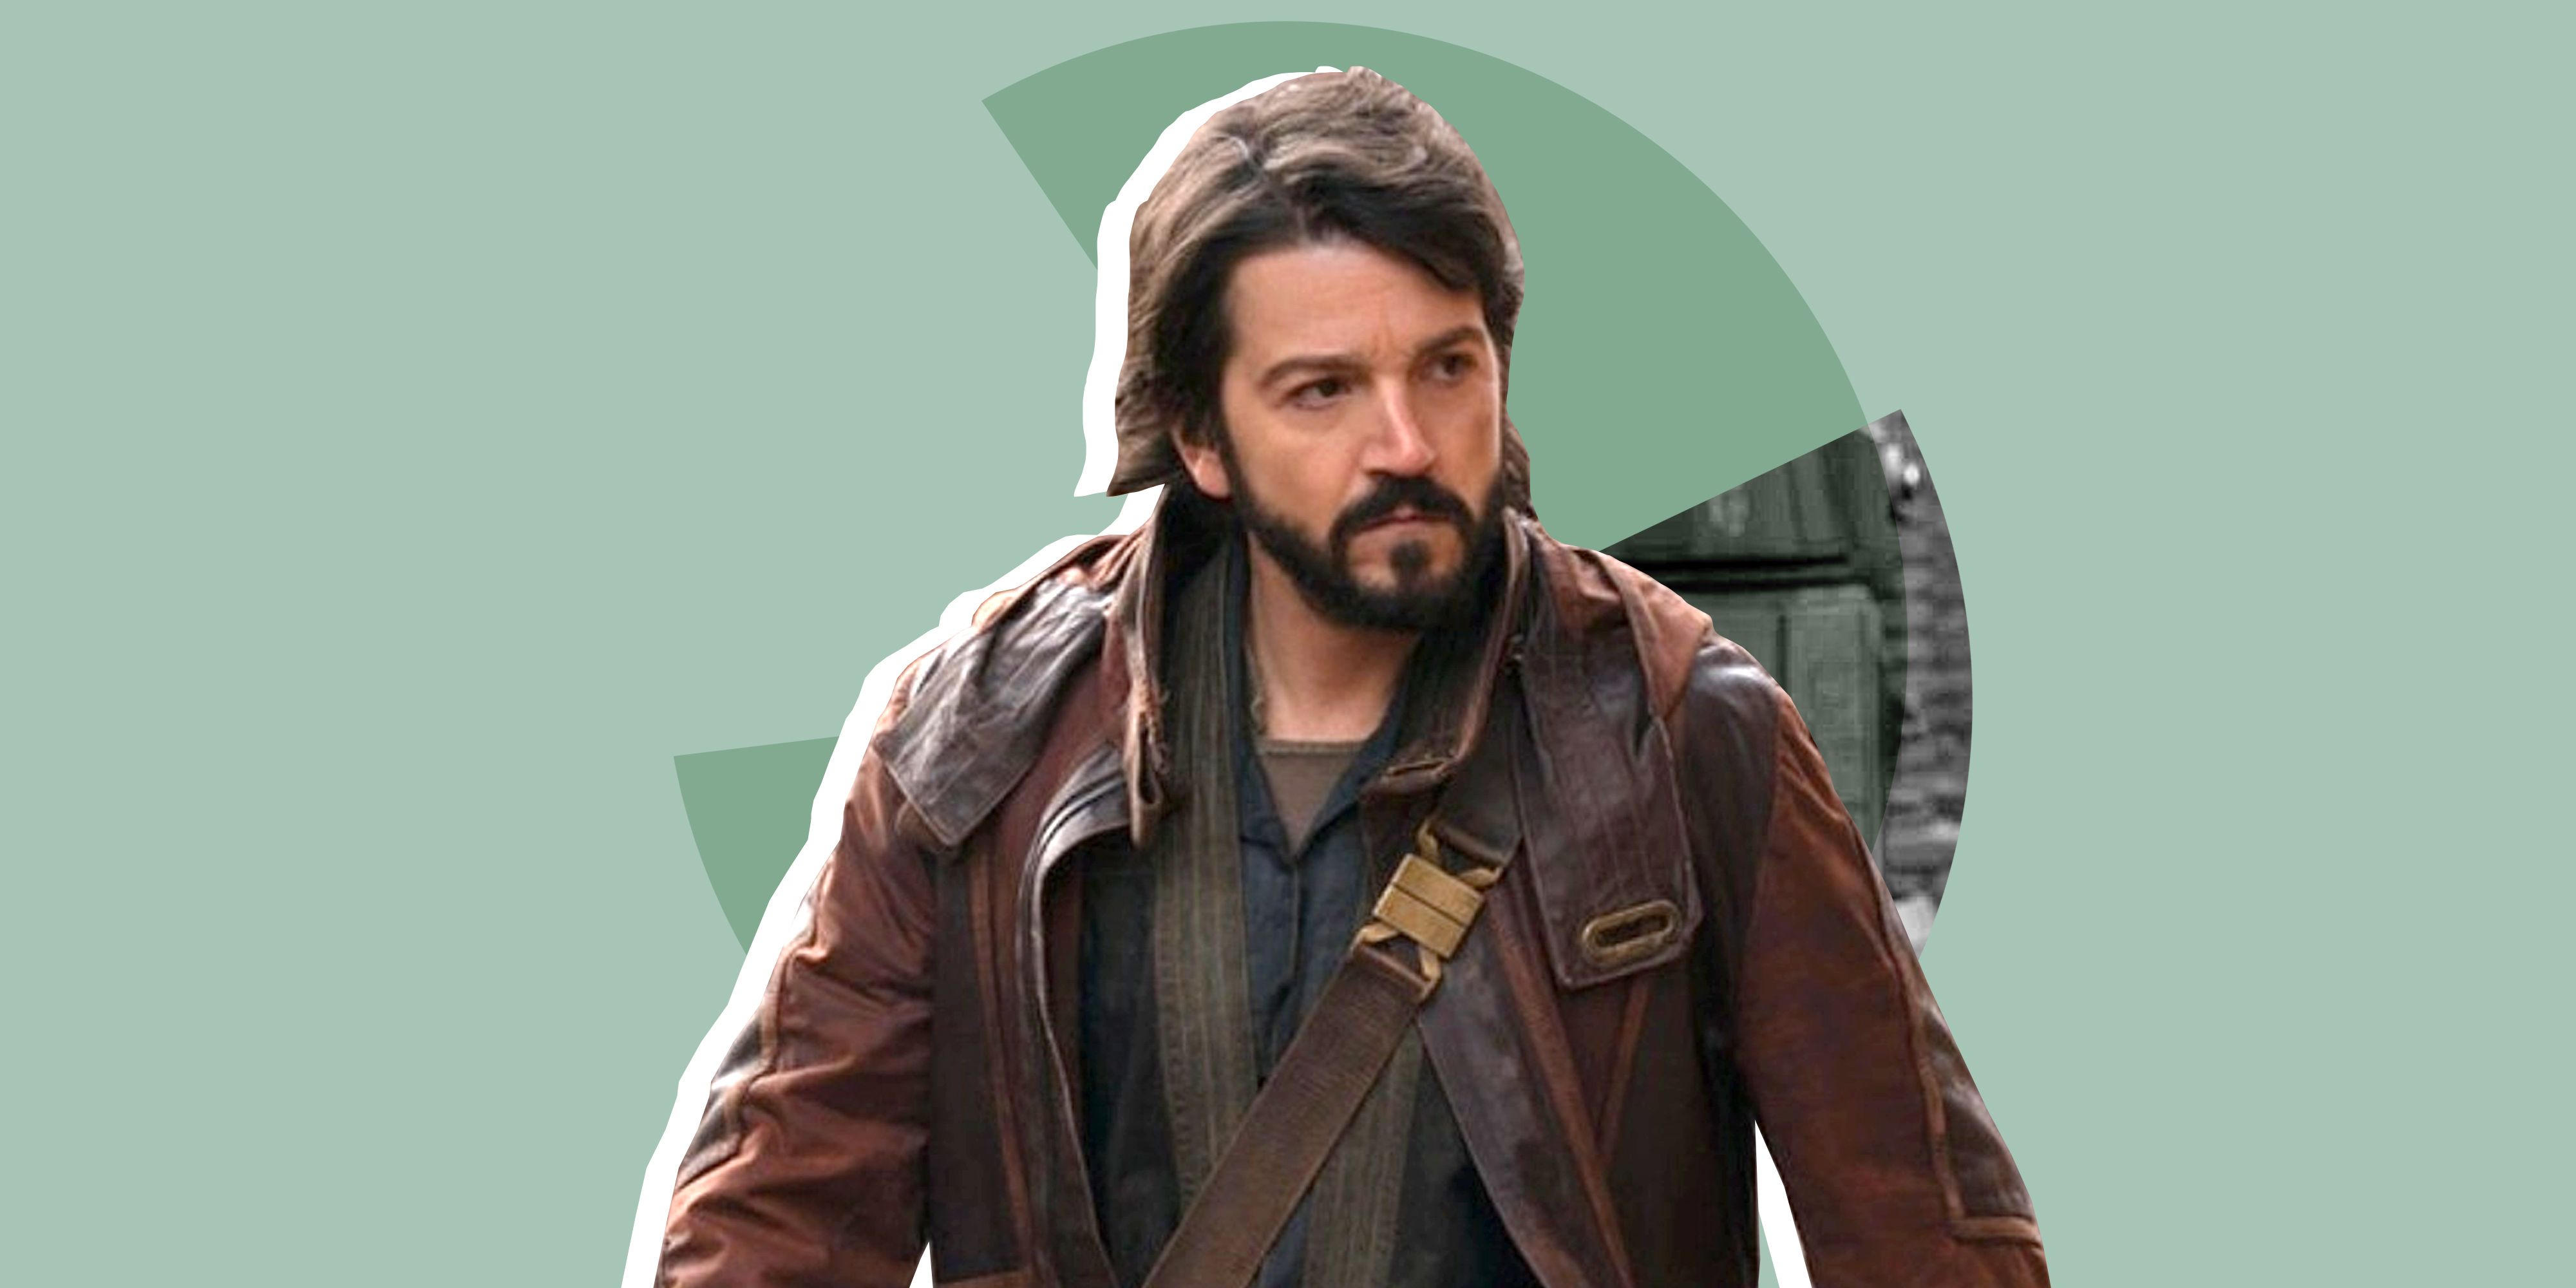 Andor's Series Finale Will Lead Directly Into Star Wars: Rogue One